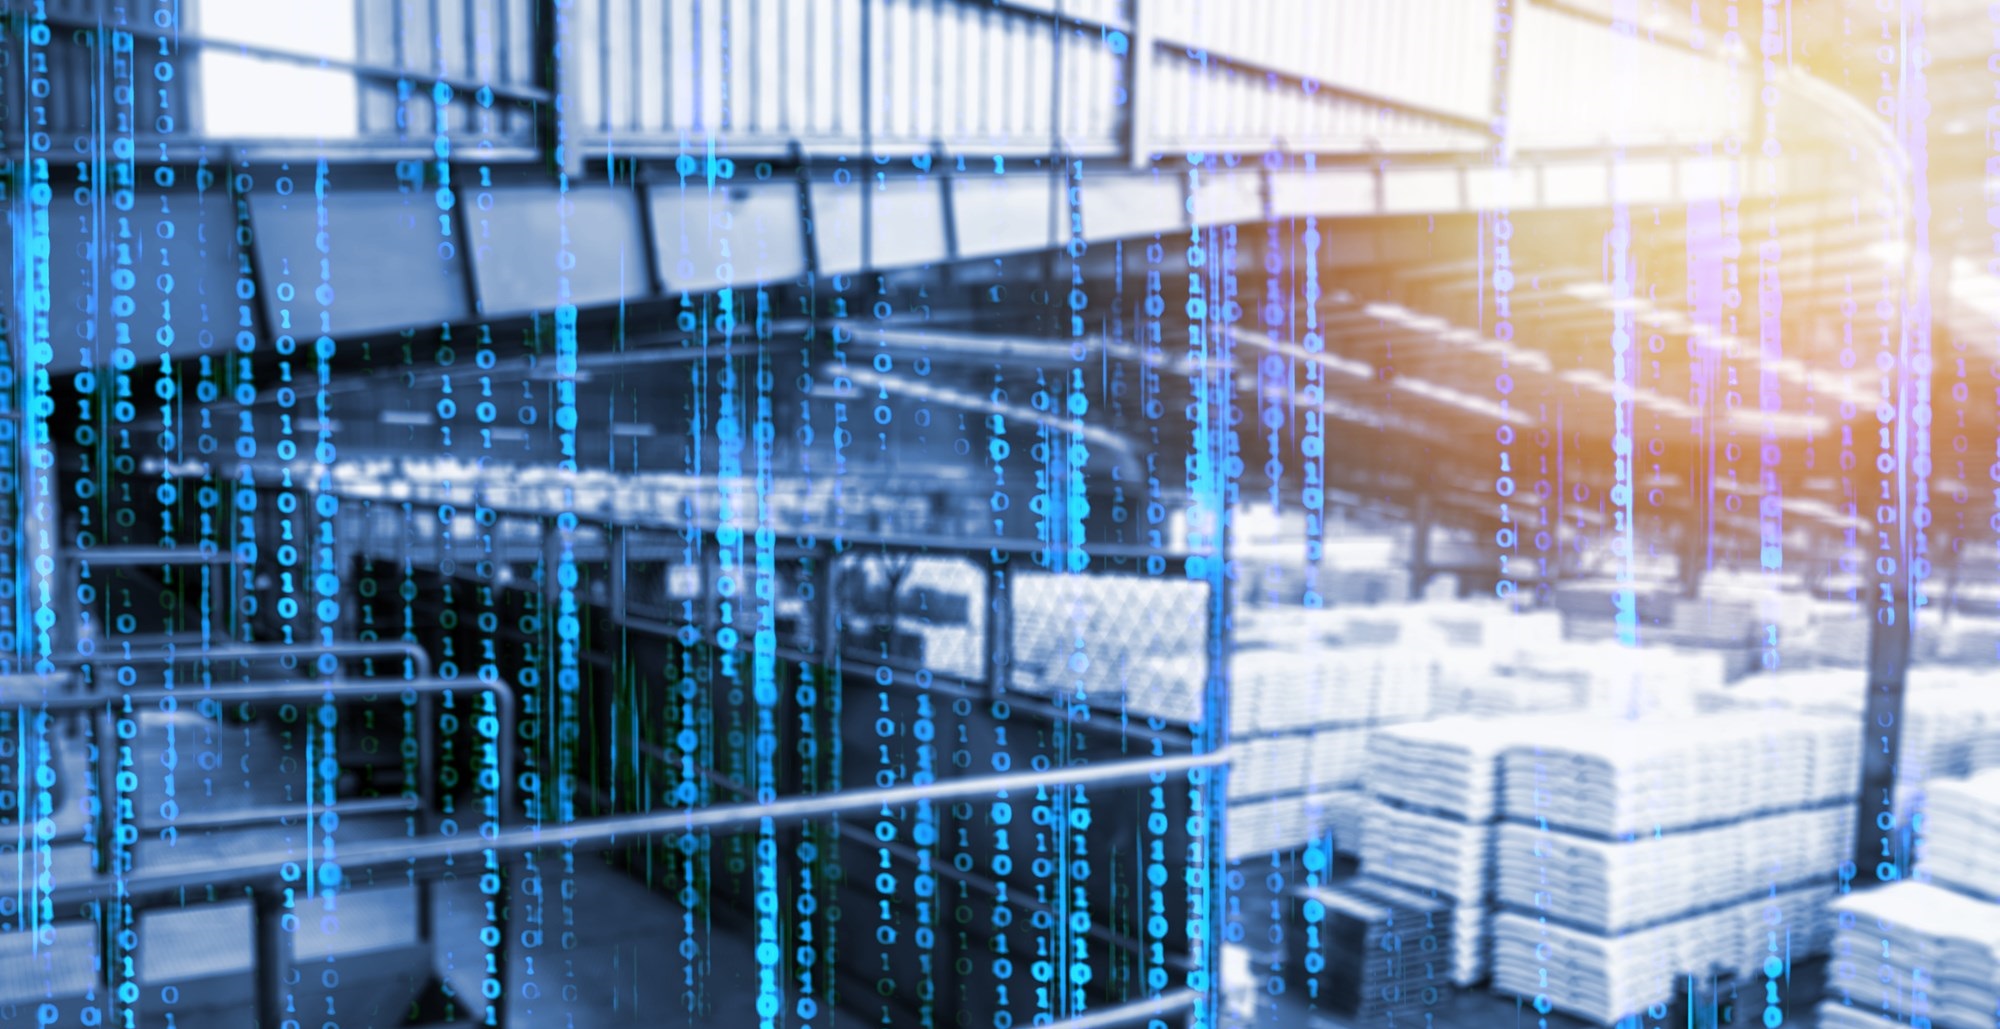  Improving Network Performance and Capacity at an Industrial Supply Center - IoT ONE Case Study